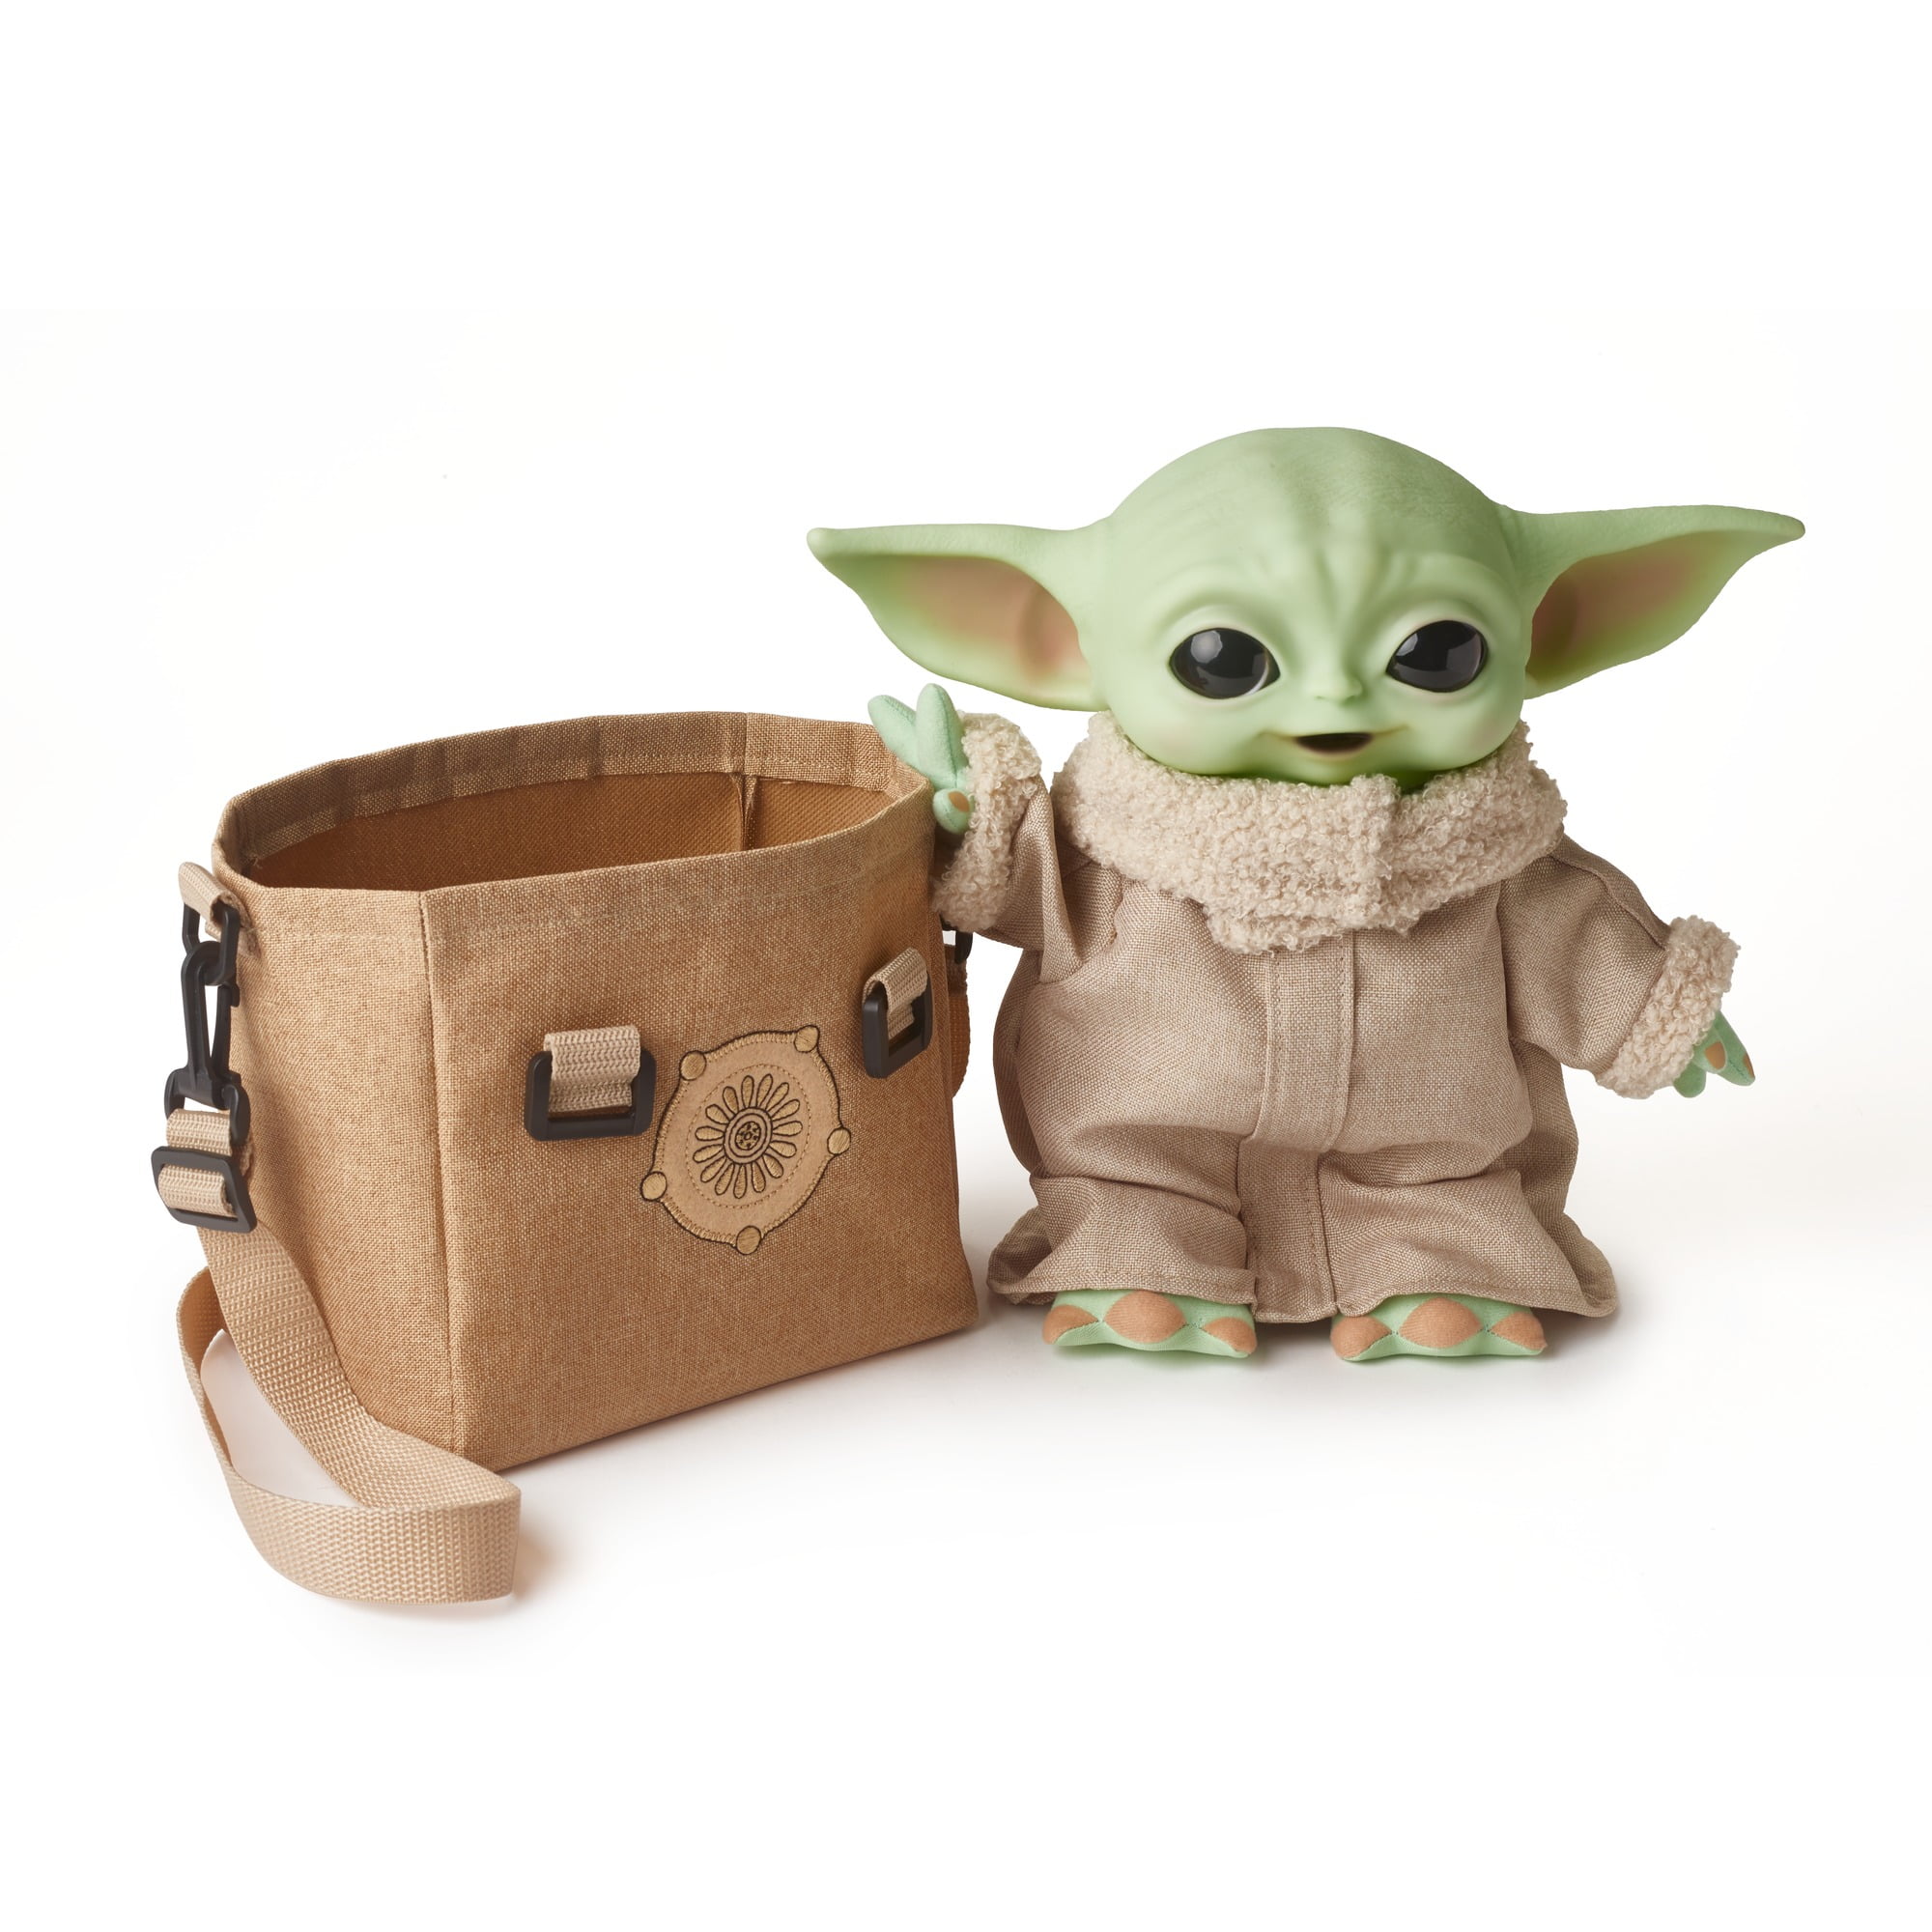 The Child Baby Yoda 11'' Plush Accessories Star Wars The Mandalorian NEW TOY 